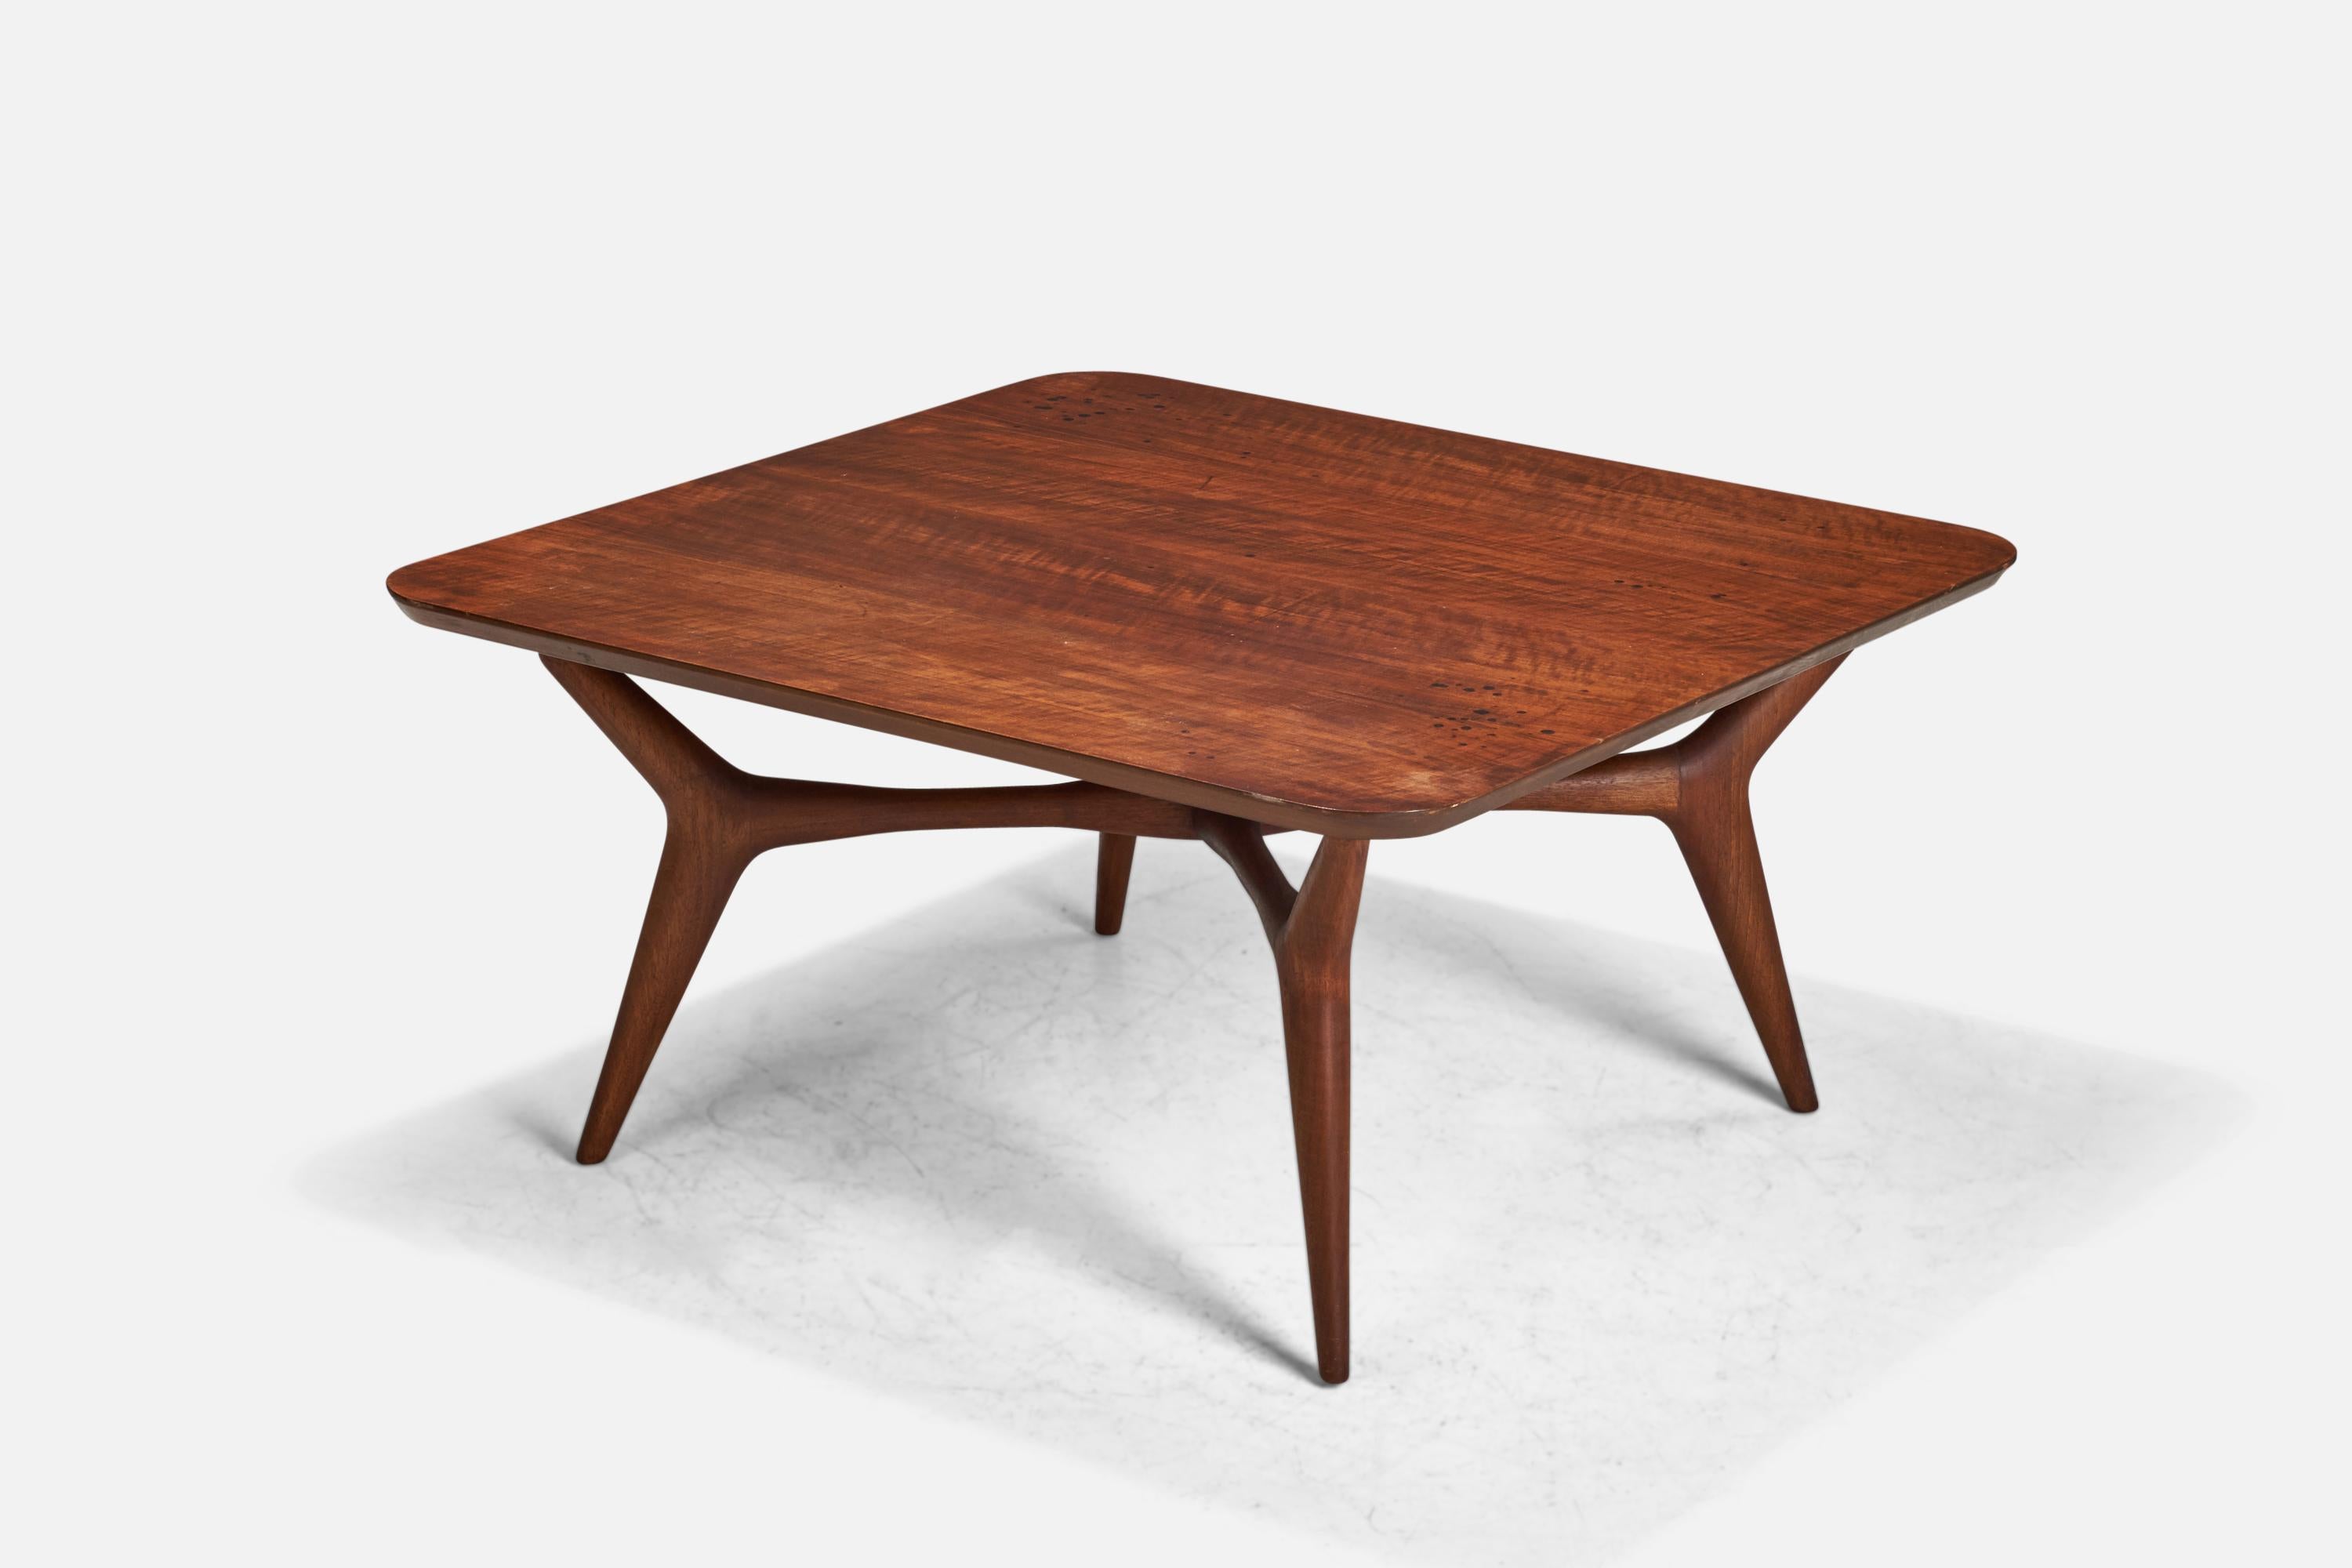 A walnut coffee table designed by Bertha Schaefer and produced by Singer & Sons, USA, 1950s.